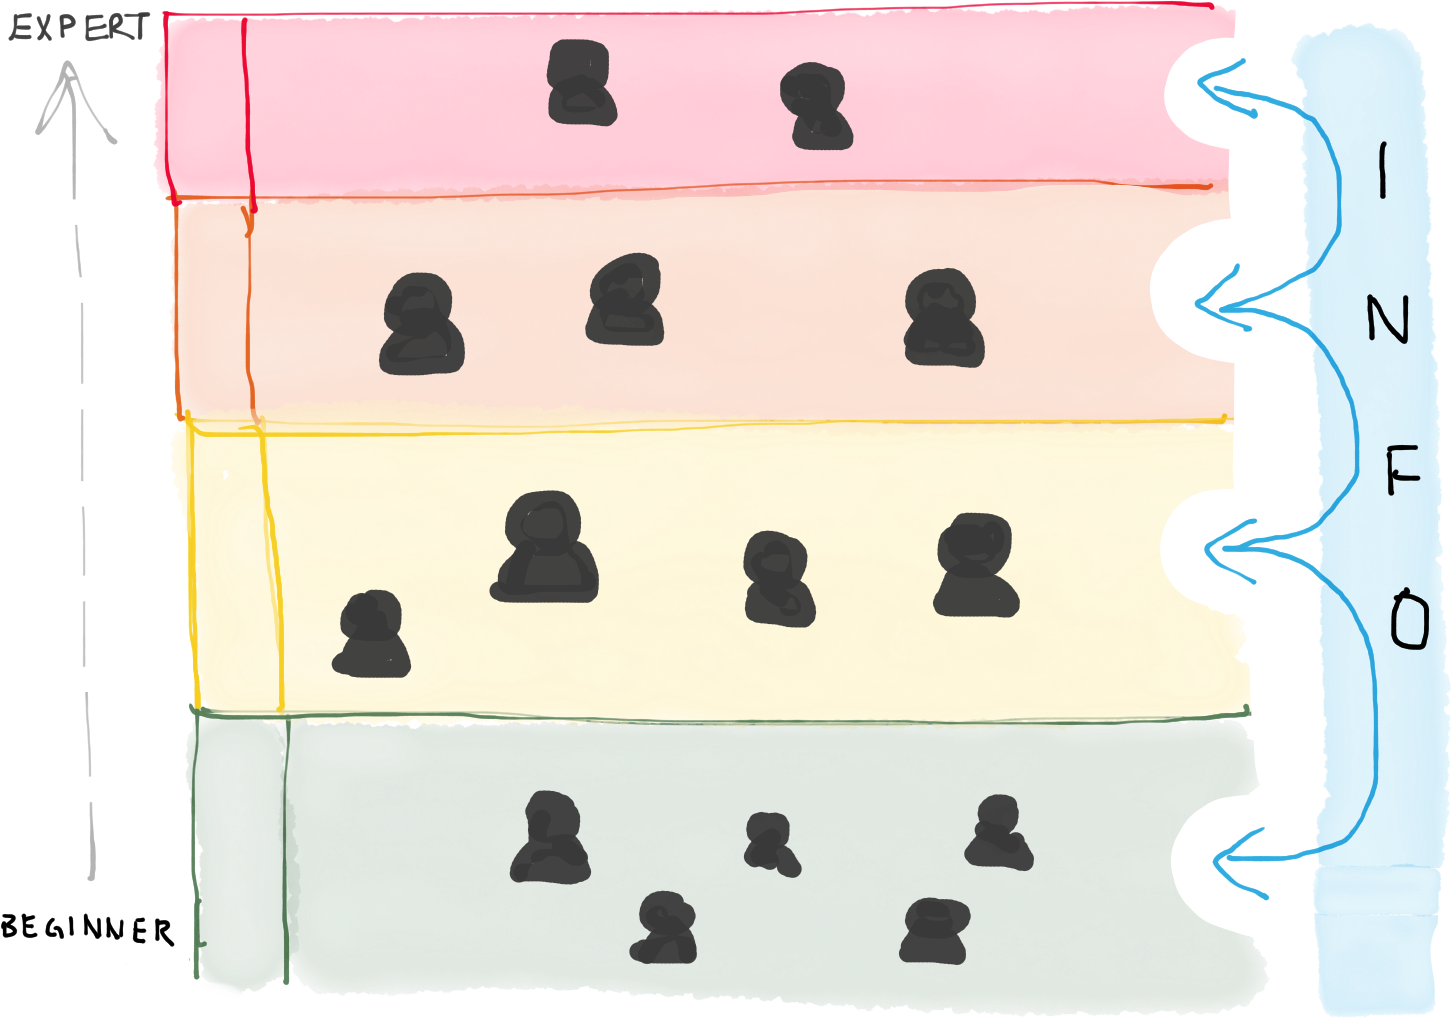 "One-up" and "one-down" communication within a community